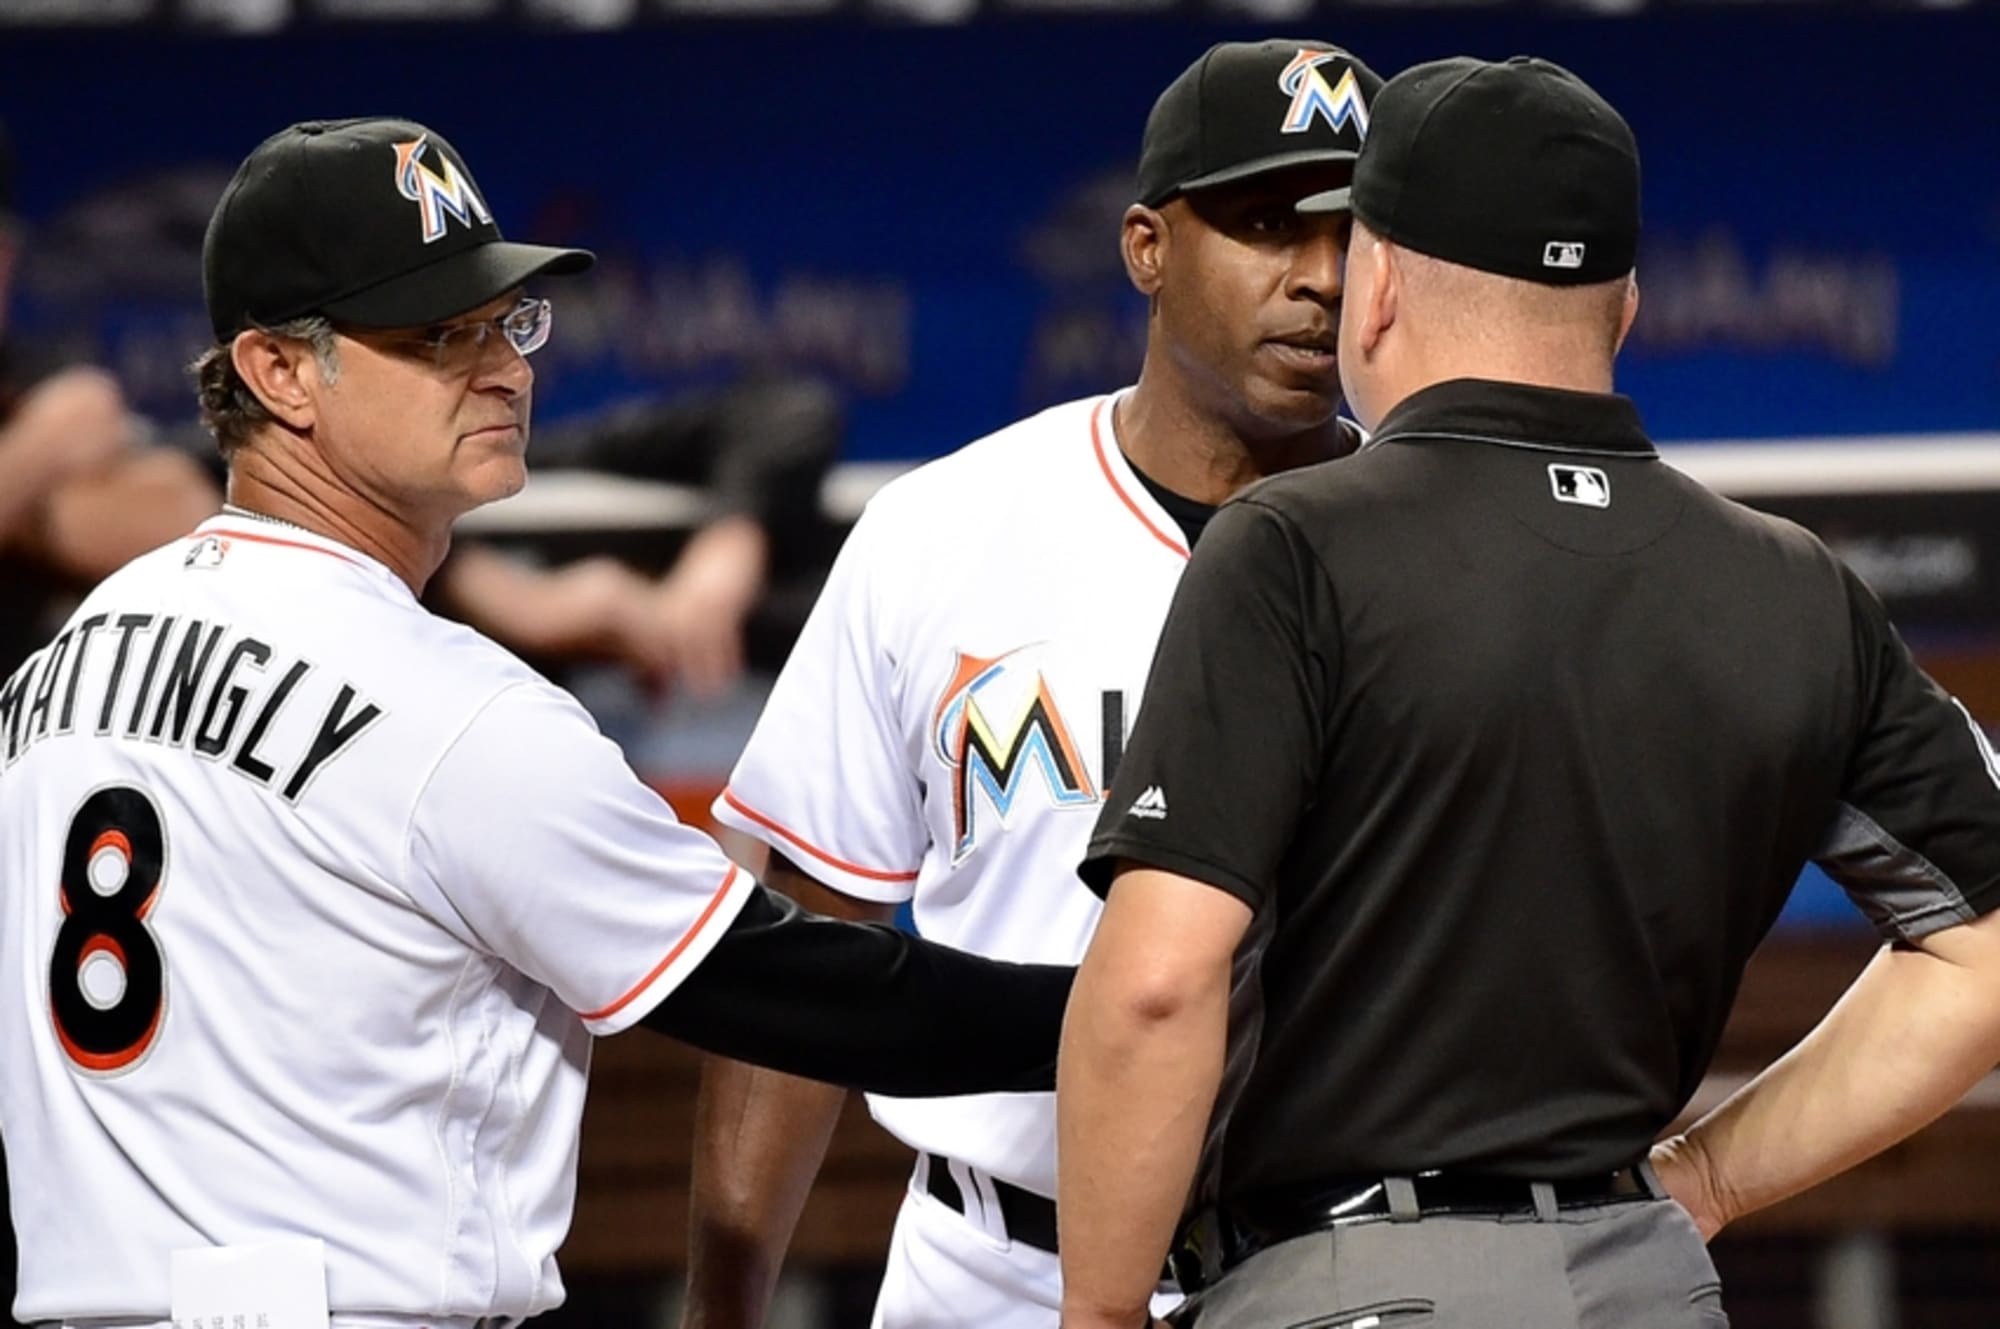 EPIC on-field experience with DON MATTINGLY and the Miami Marlins